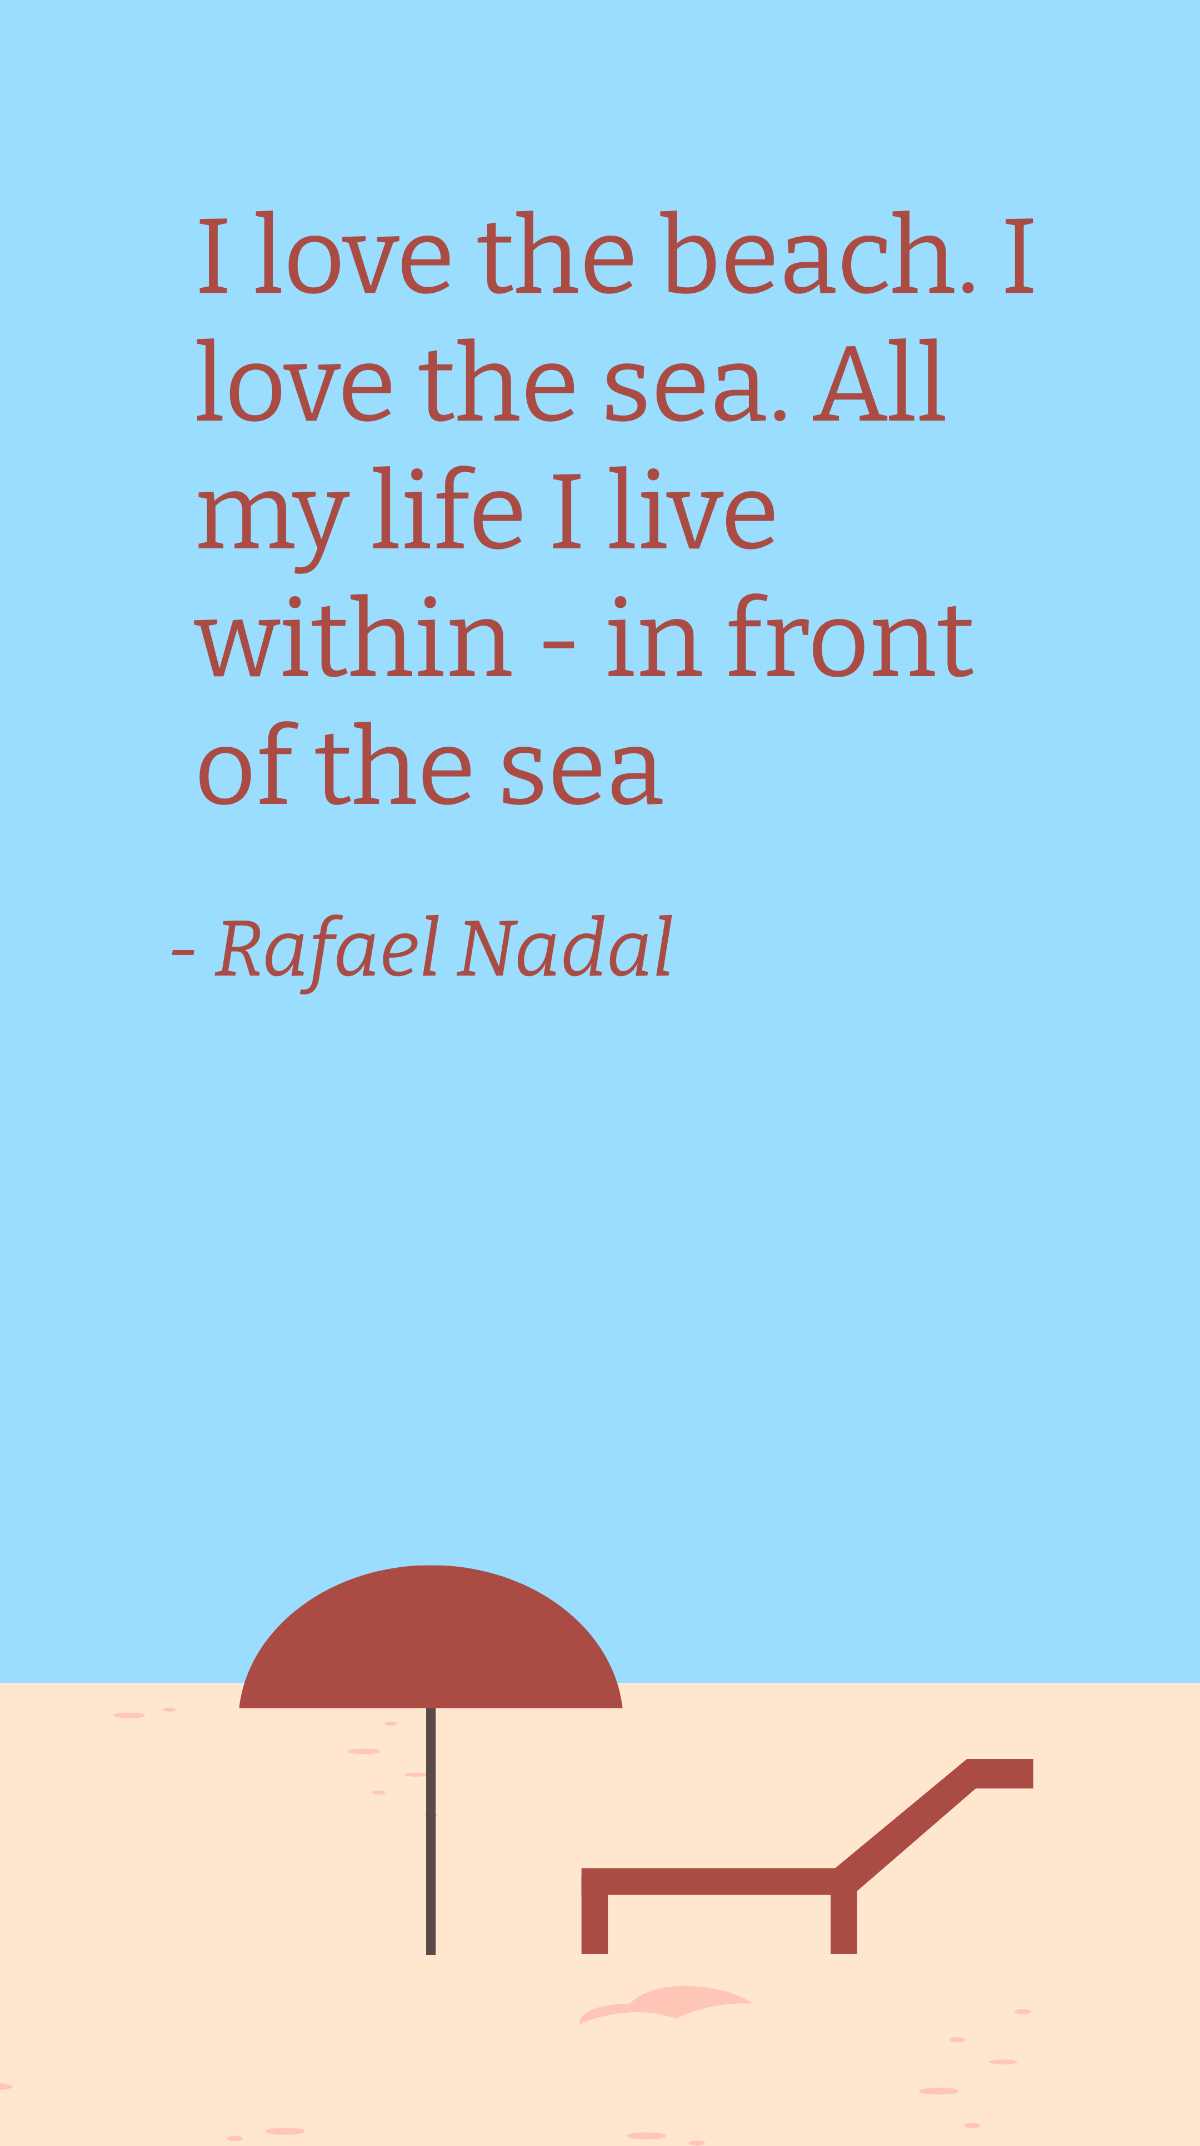 Free Rafael Nadal - I love the beach. I love the sea. All my life I live within - in front of the sea Template